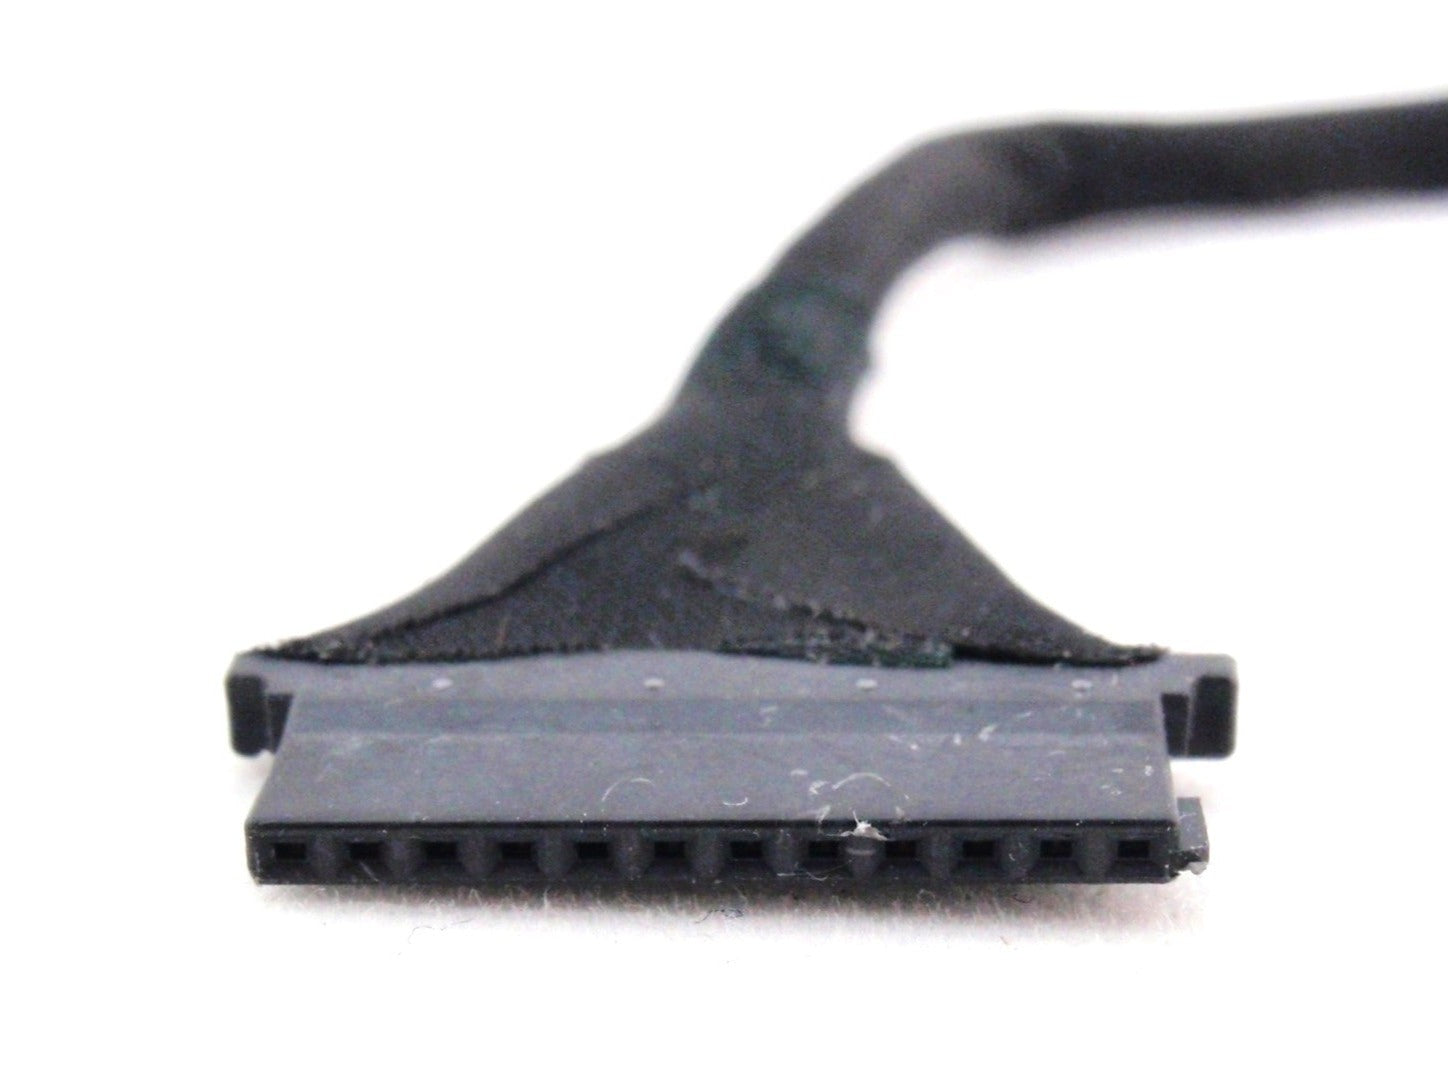 HP New DC In Power Jack Charging Port Connector Cable 931442-Y20 CBL00816-0190 Omen 15-DC 931442-F20 -S20 -T20 -Y20 L24343-001